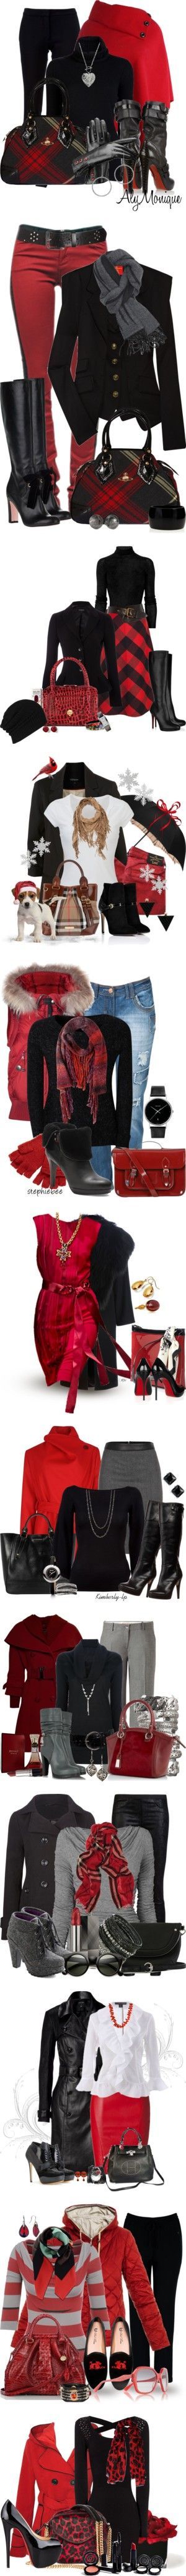 “Red and Black Contest” by jackie22  liked on Polyvore